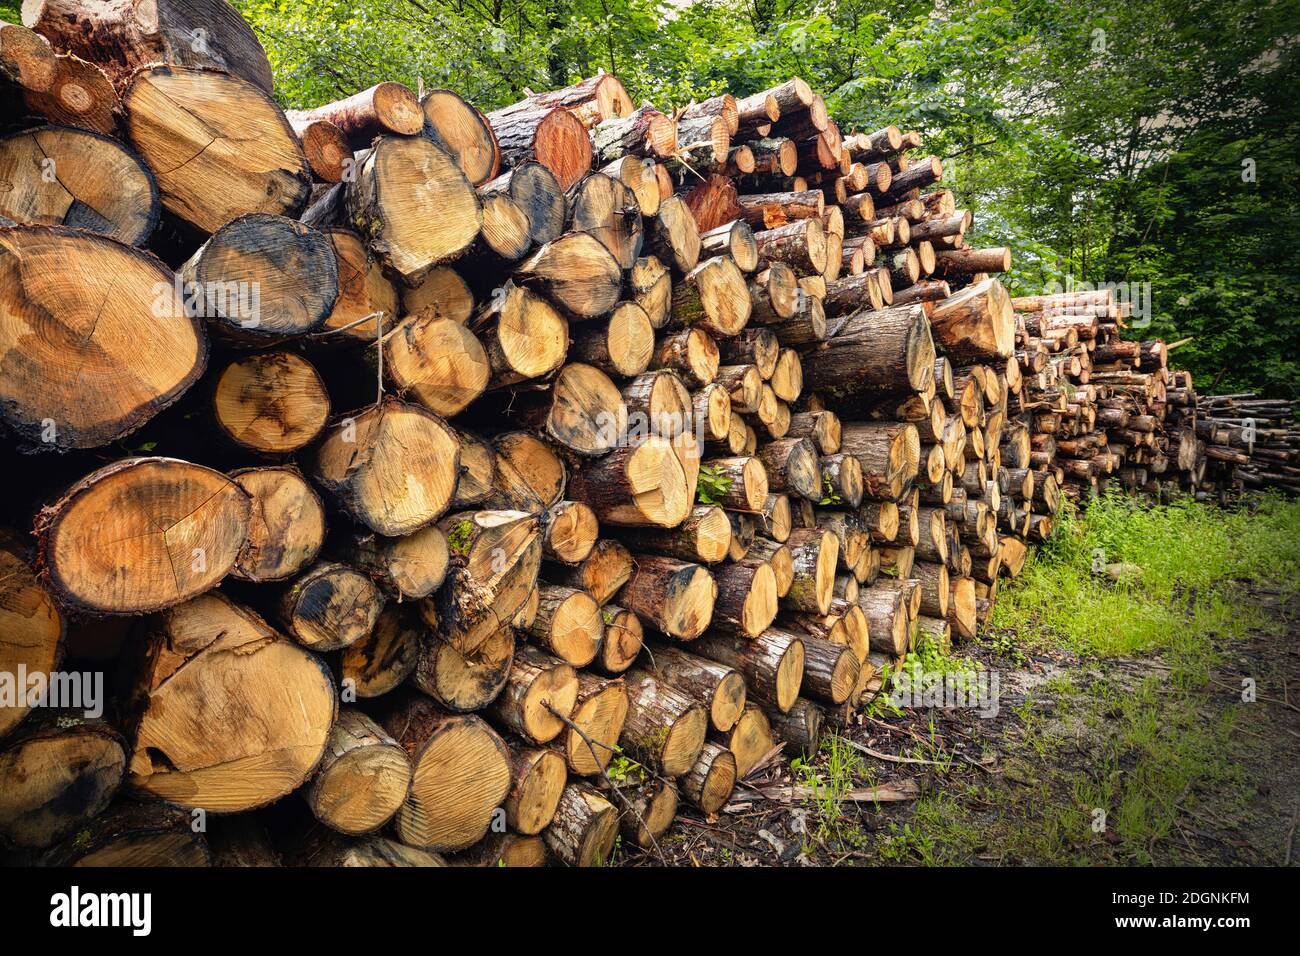 Wood stacked in readiness for winter.  Asturias, Spain Stock Photo